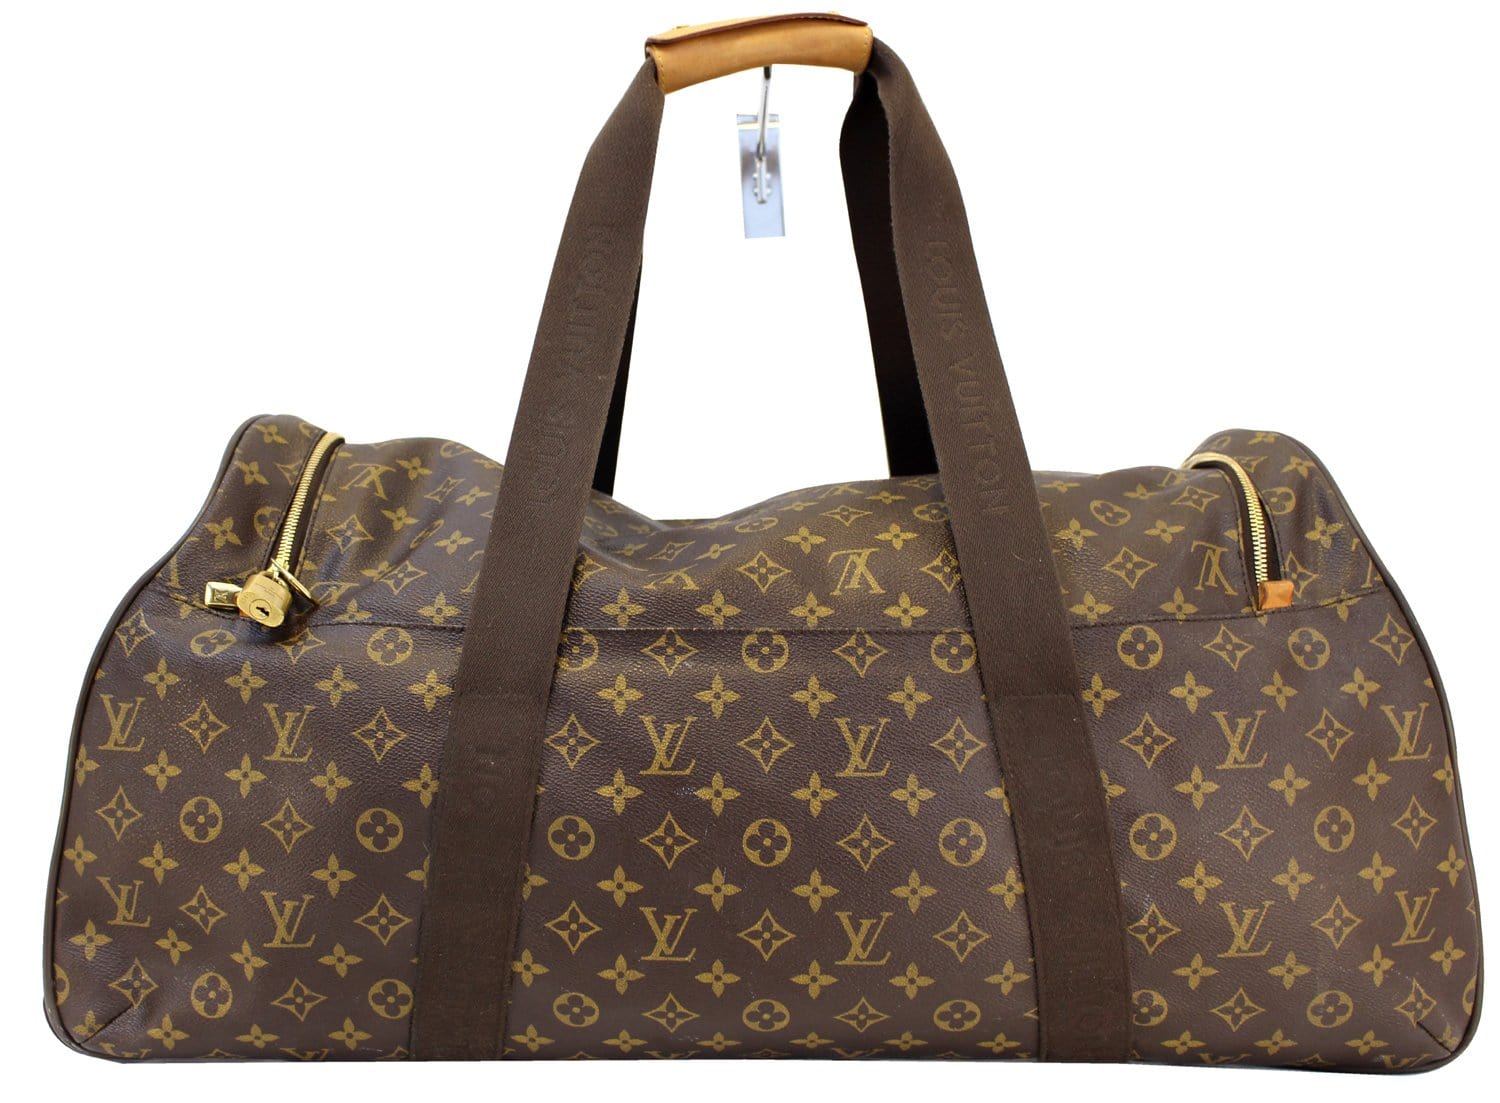 Naturally LV Duffle Bag by DaCre8iveOne